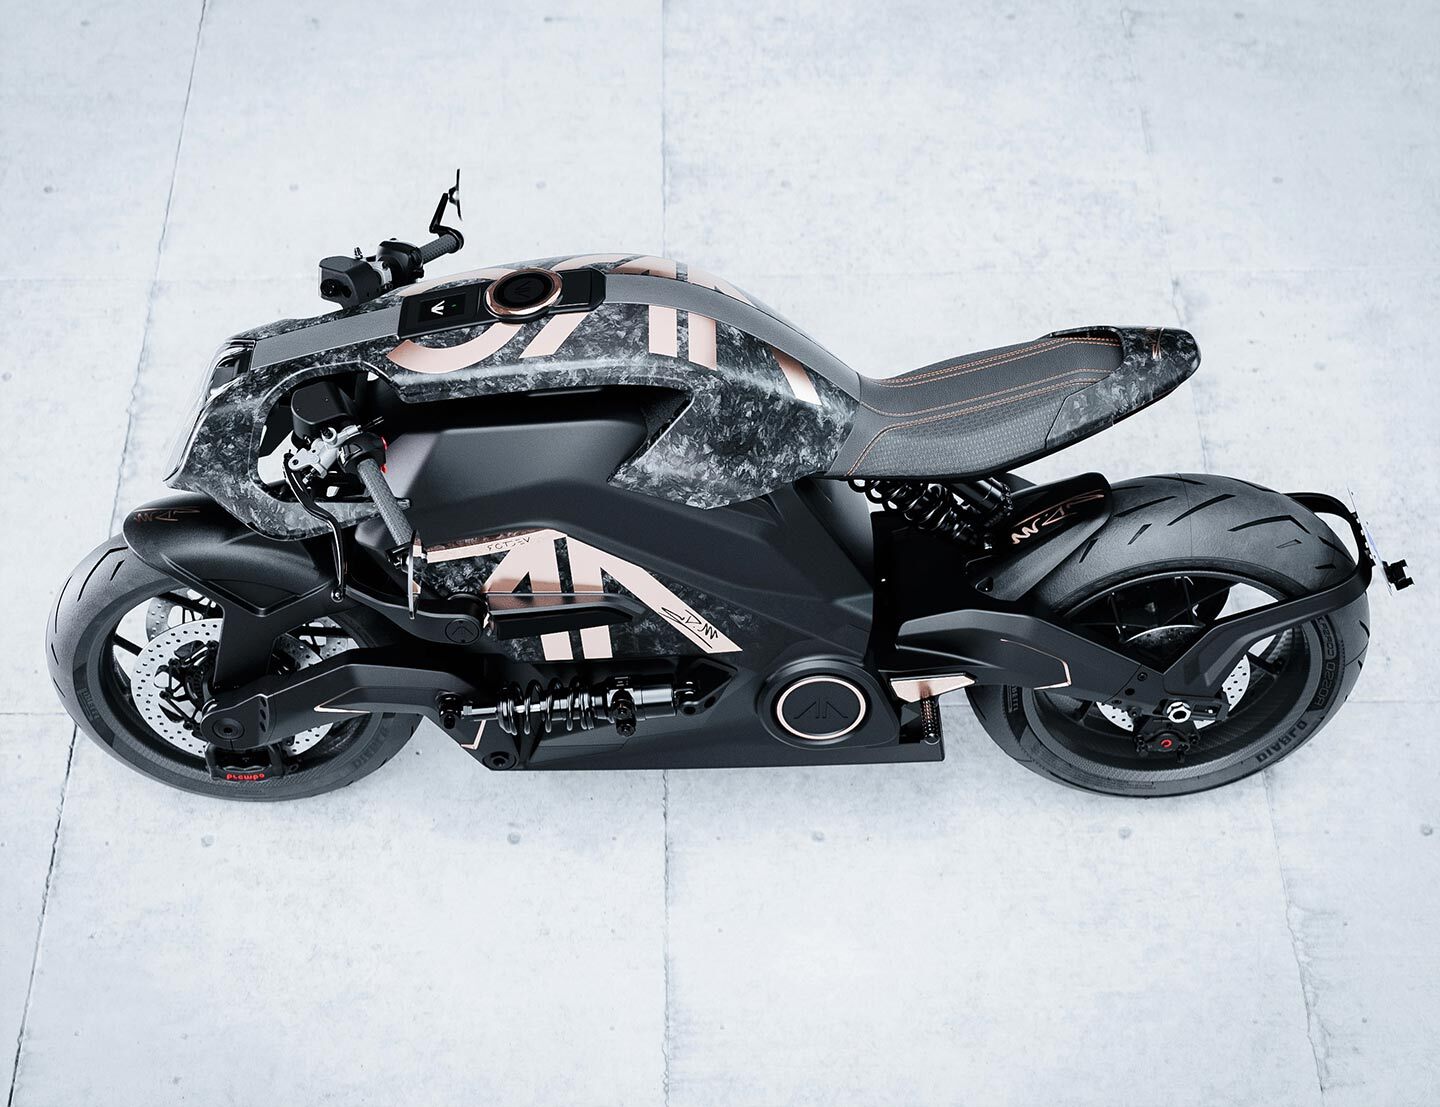 16-facts-about-motorcycle-design